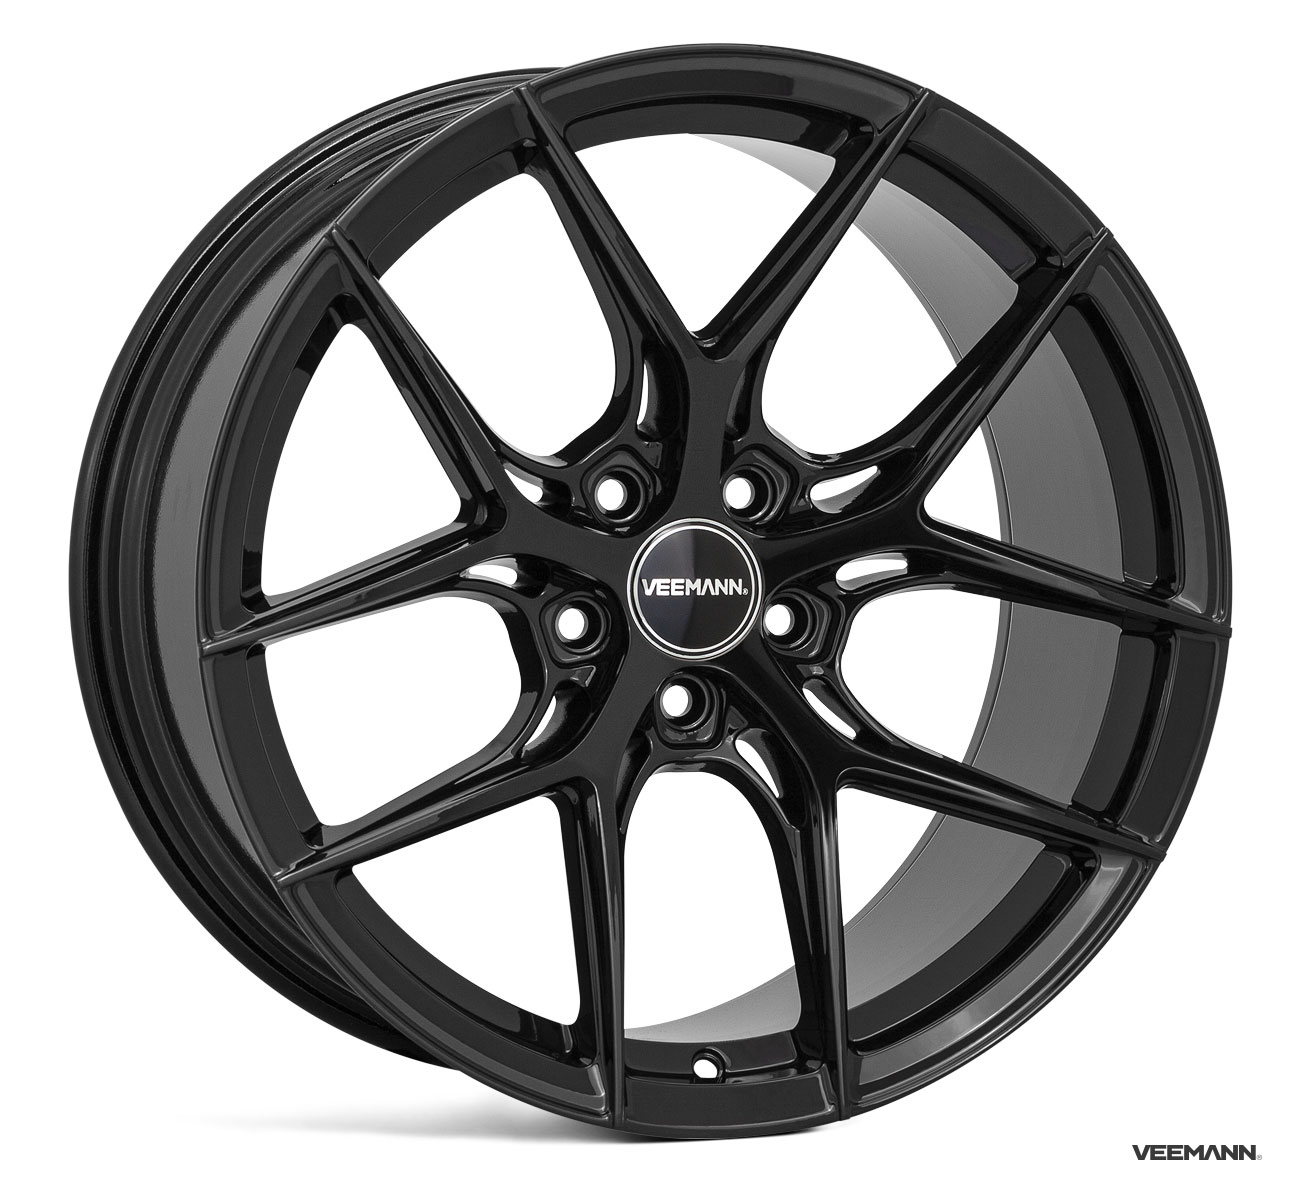 NEW 20" VEEMANN VC580R ALLOY WHEELS IN GLOSS BLACK WITH WIDER 10" REARS